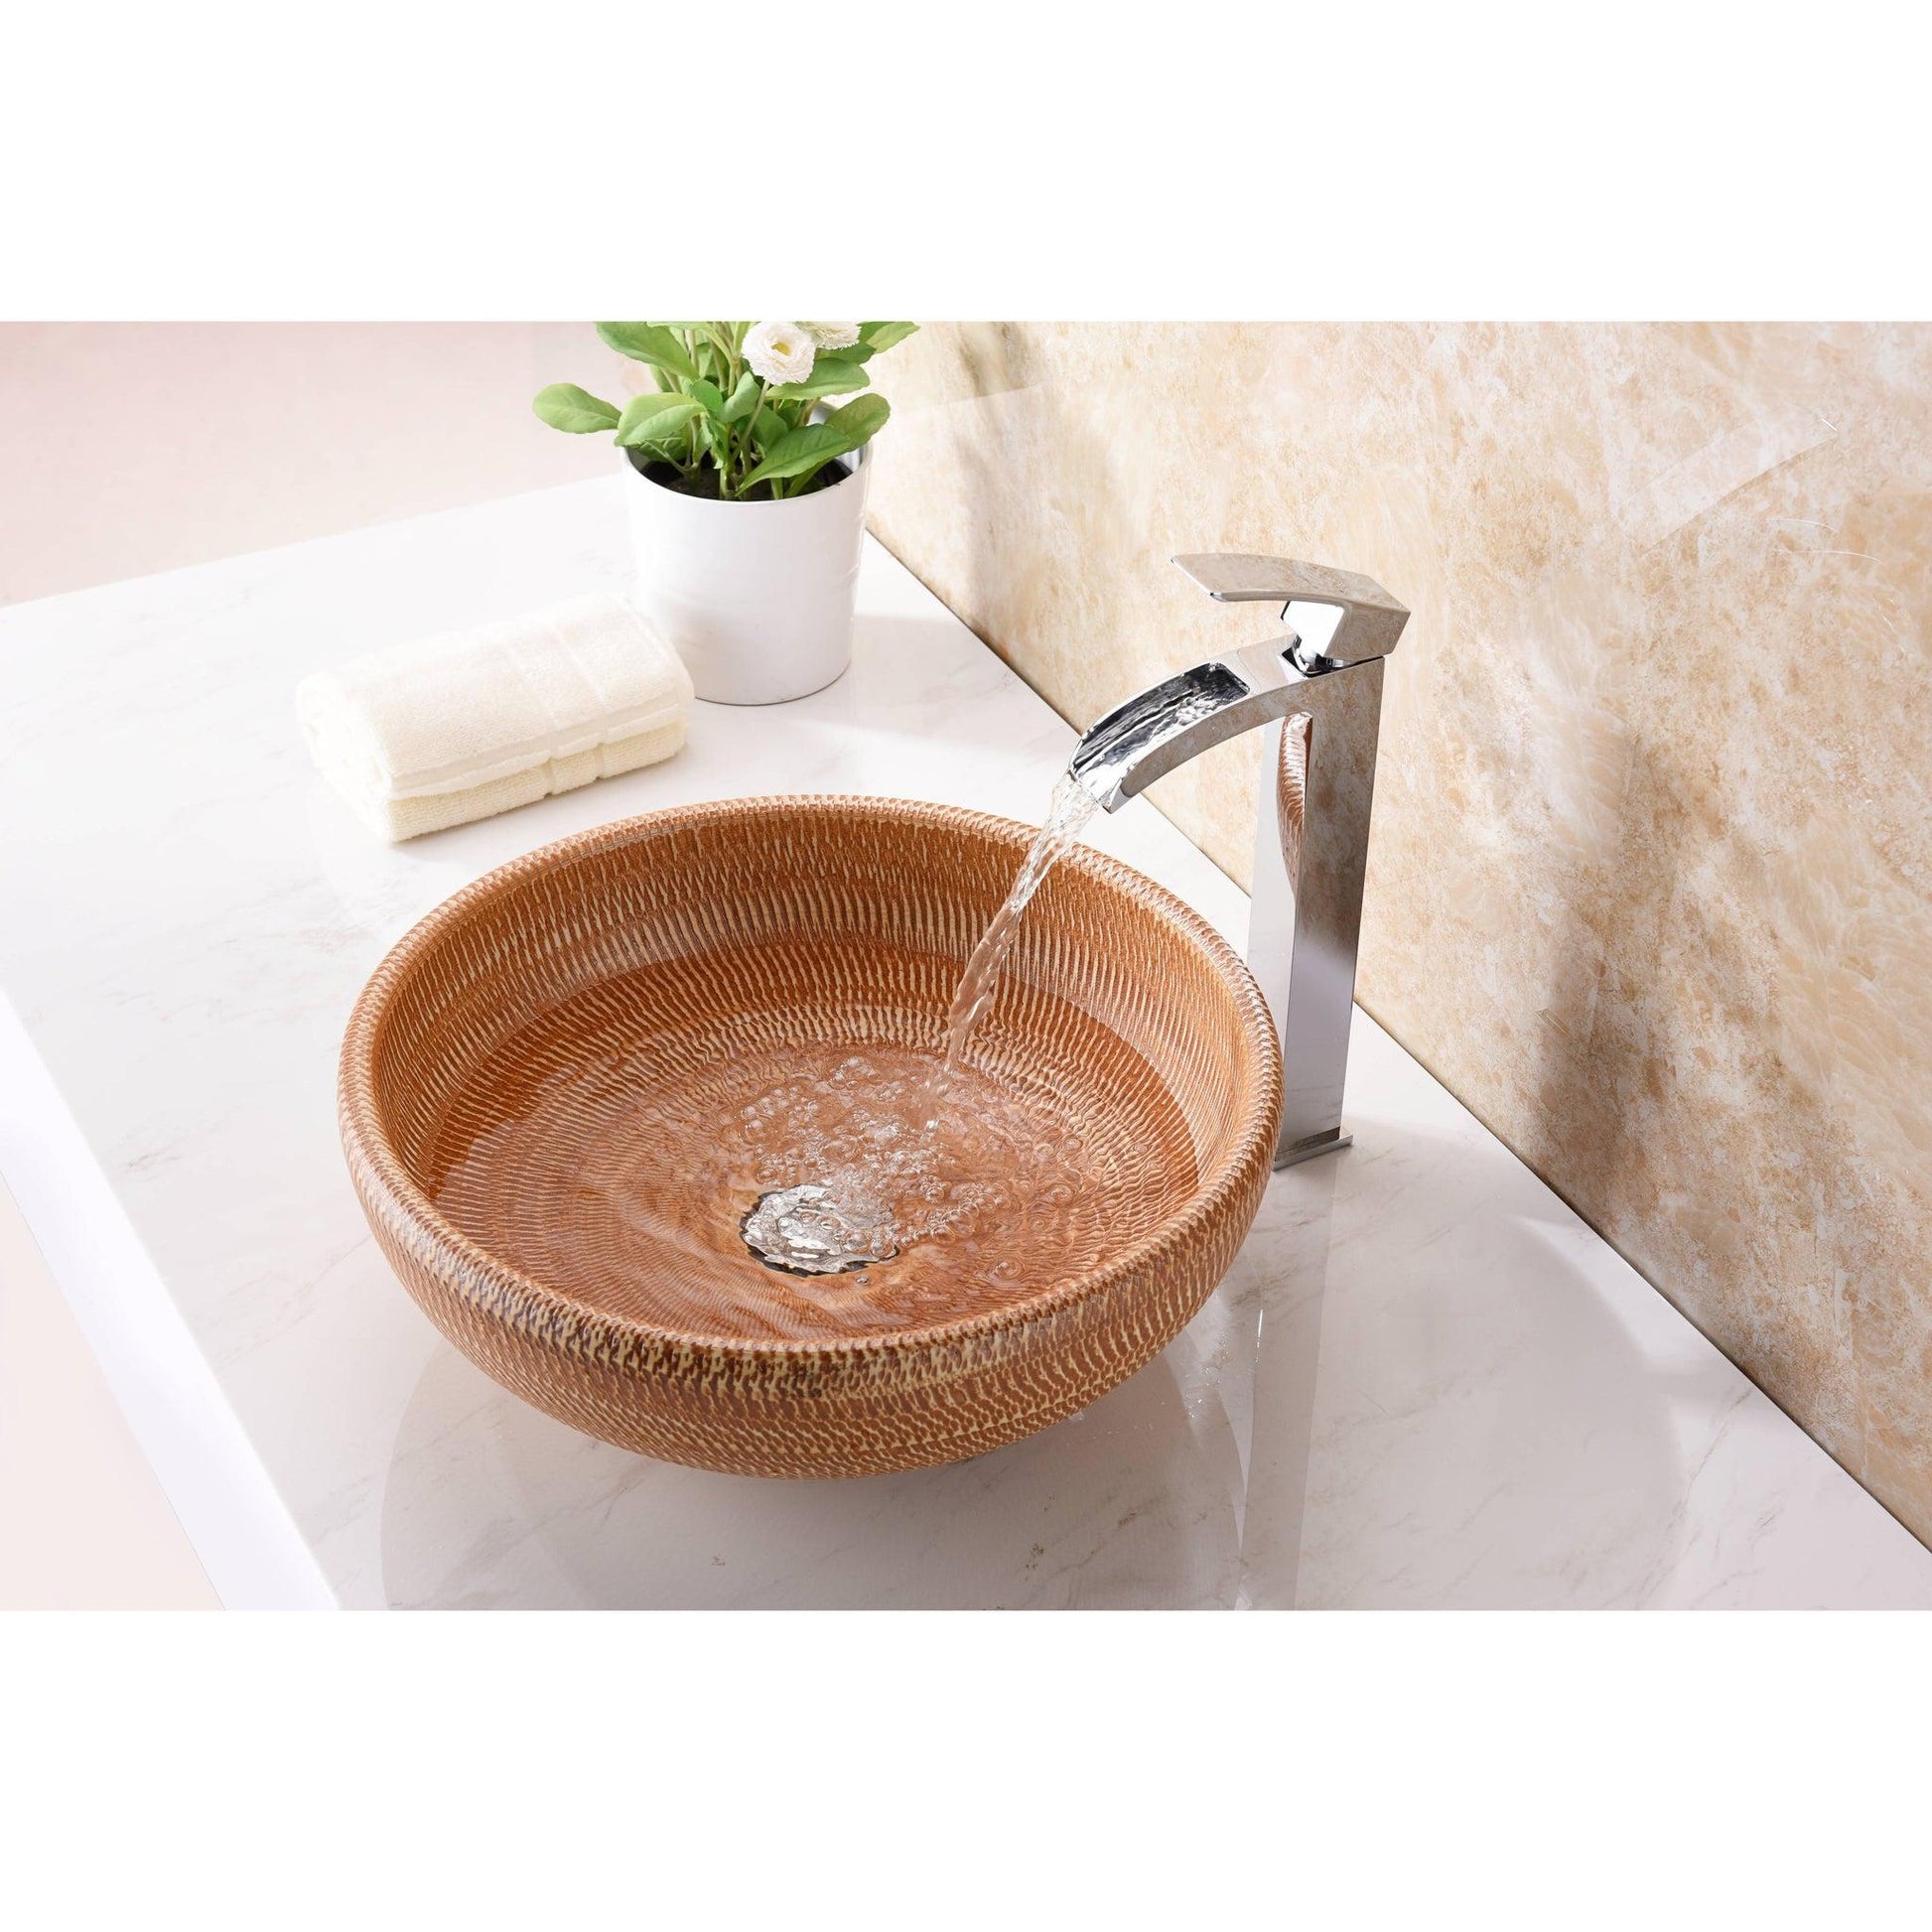 ANZZI Earthen Series 16" x 16" Round Beige Deco-Glass Vessel Sink With Polished Chrome Pop-Up Drain